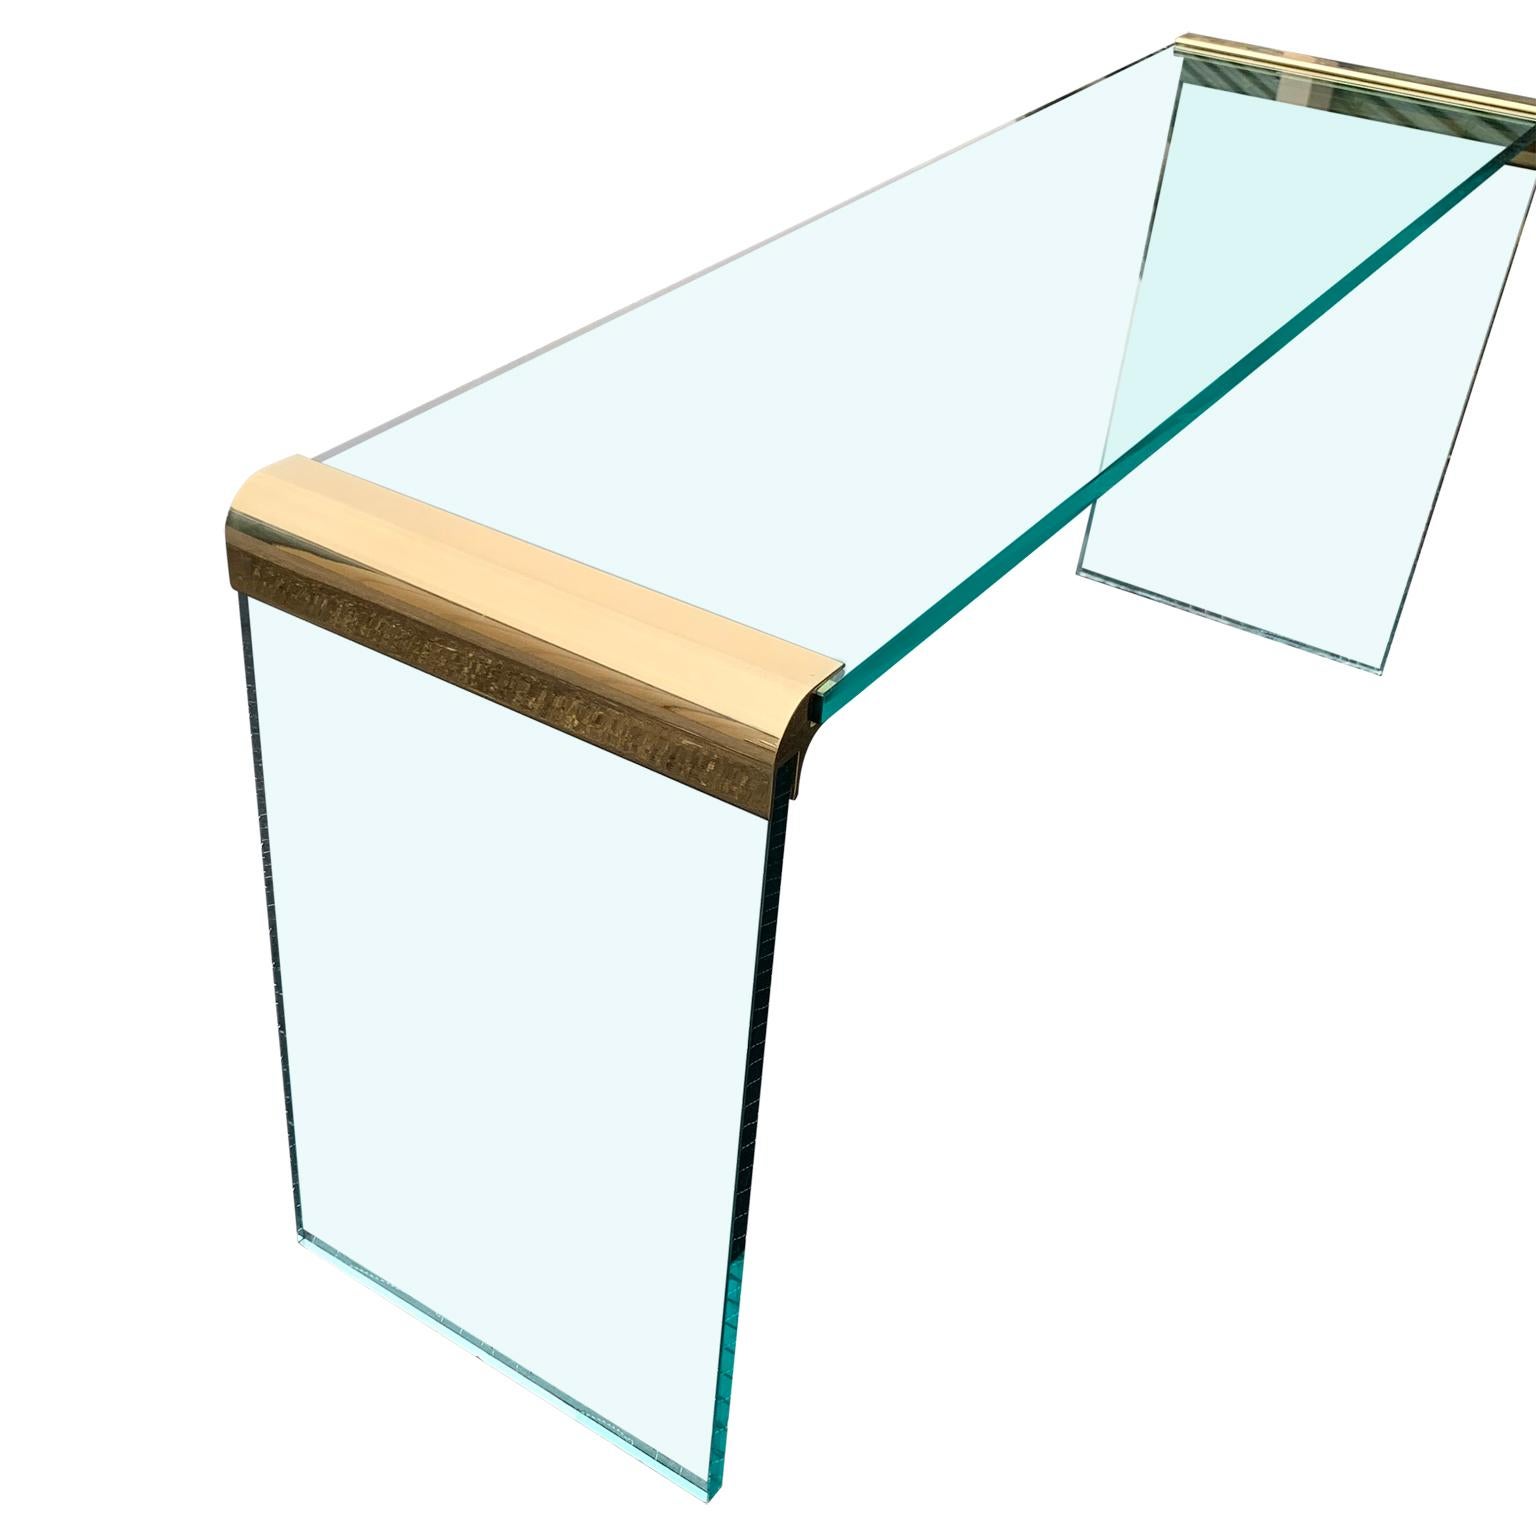 Narrow Mid-Century Modern brass glass top waterfall console table by Pace.
Glass is 3/4 inch thick (1,905 cm)